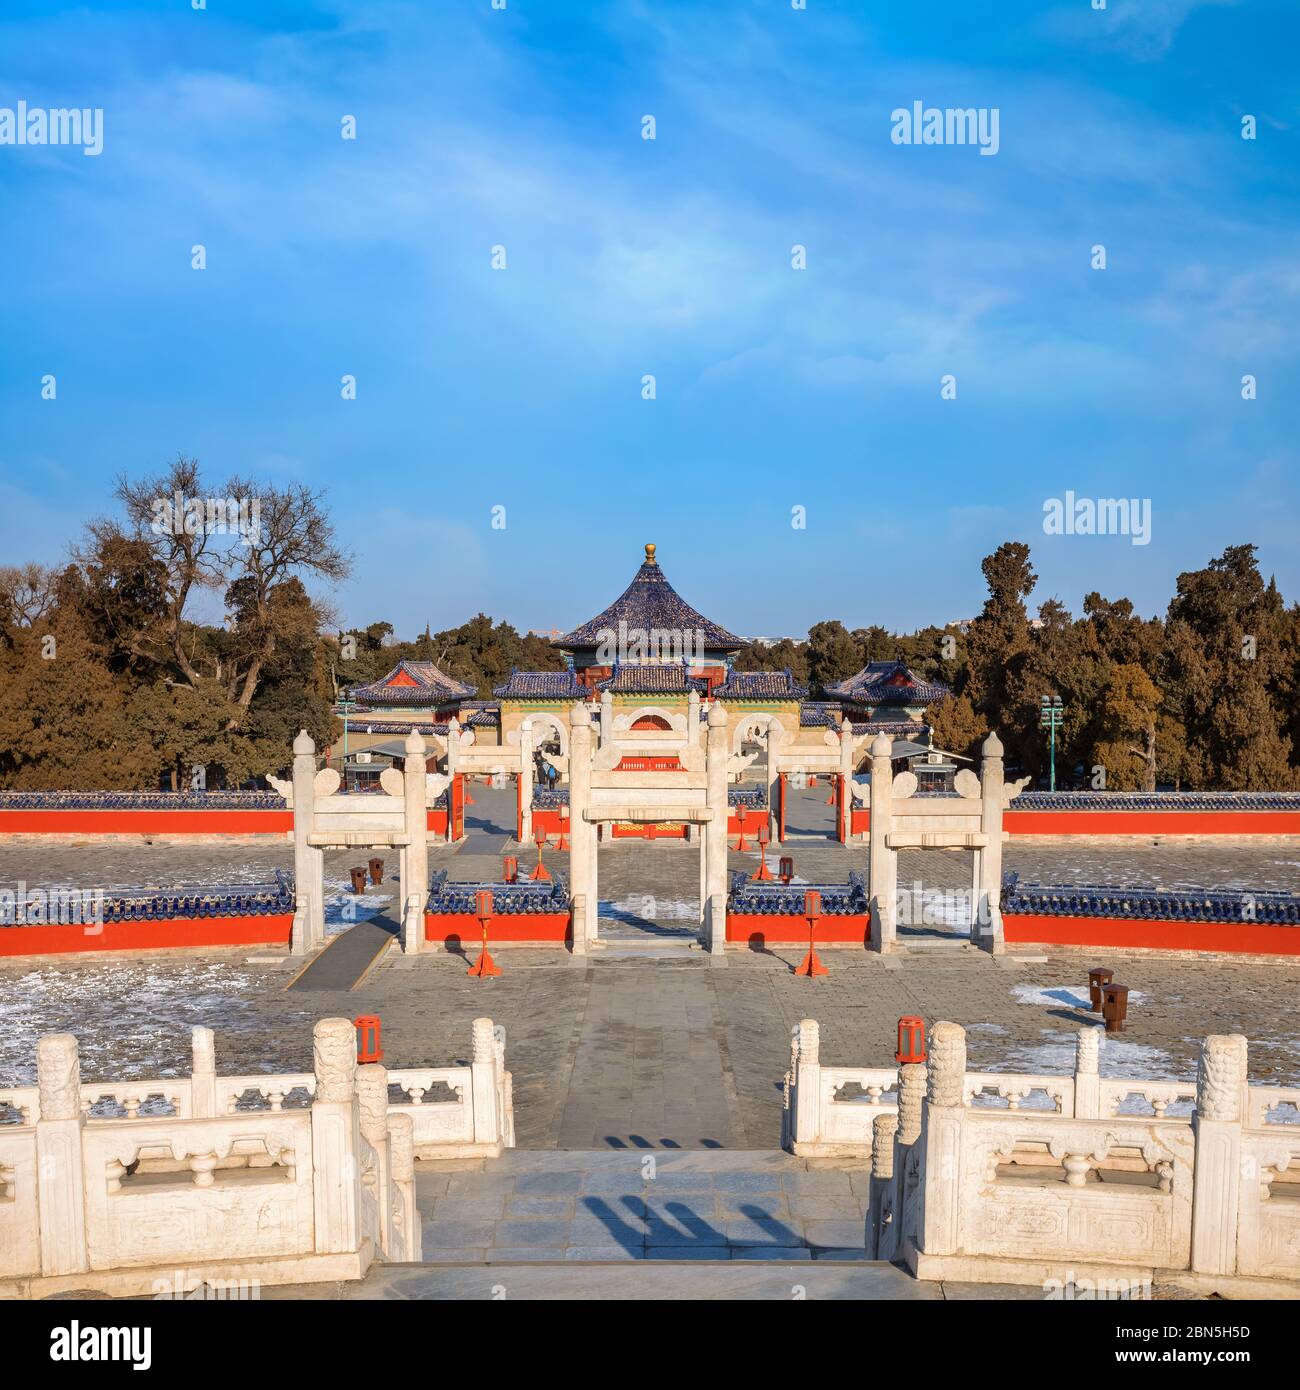 Beijing, China - Jan 10 2020: The Circular Mound Altar at the Temple of Heaven, an imperial complex of religious buildings founded by Yongle Emperor i Stock Photo